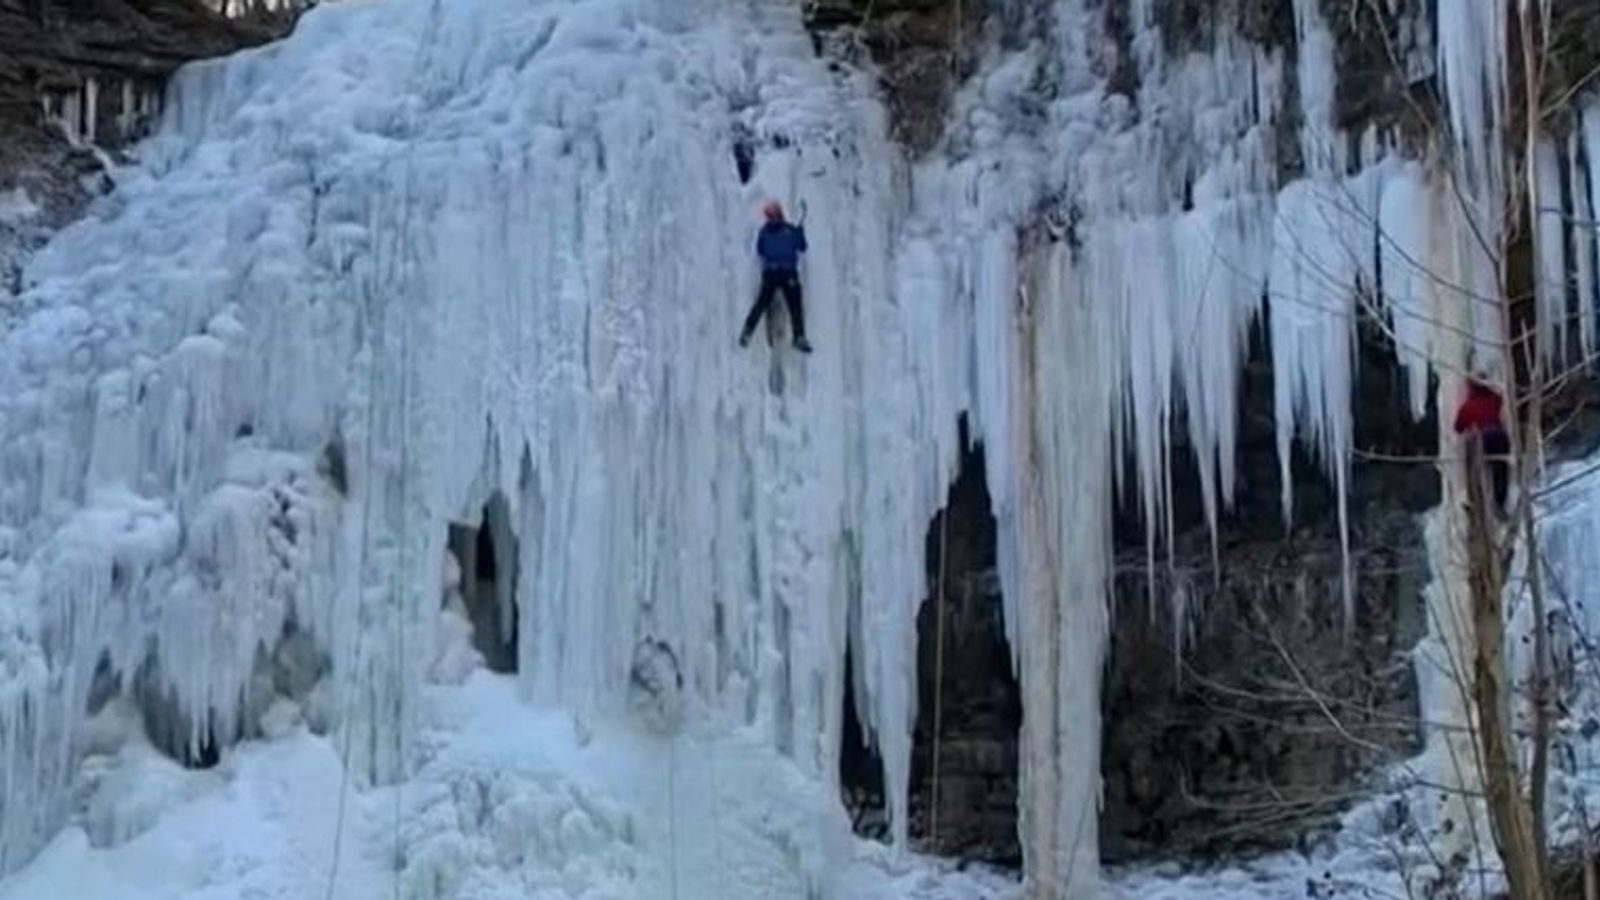 Freezing weather in Canada that brought blizzards to the Great Lakes region has created the spectacle of frozen waterfalls.